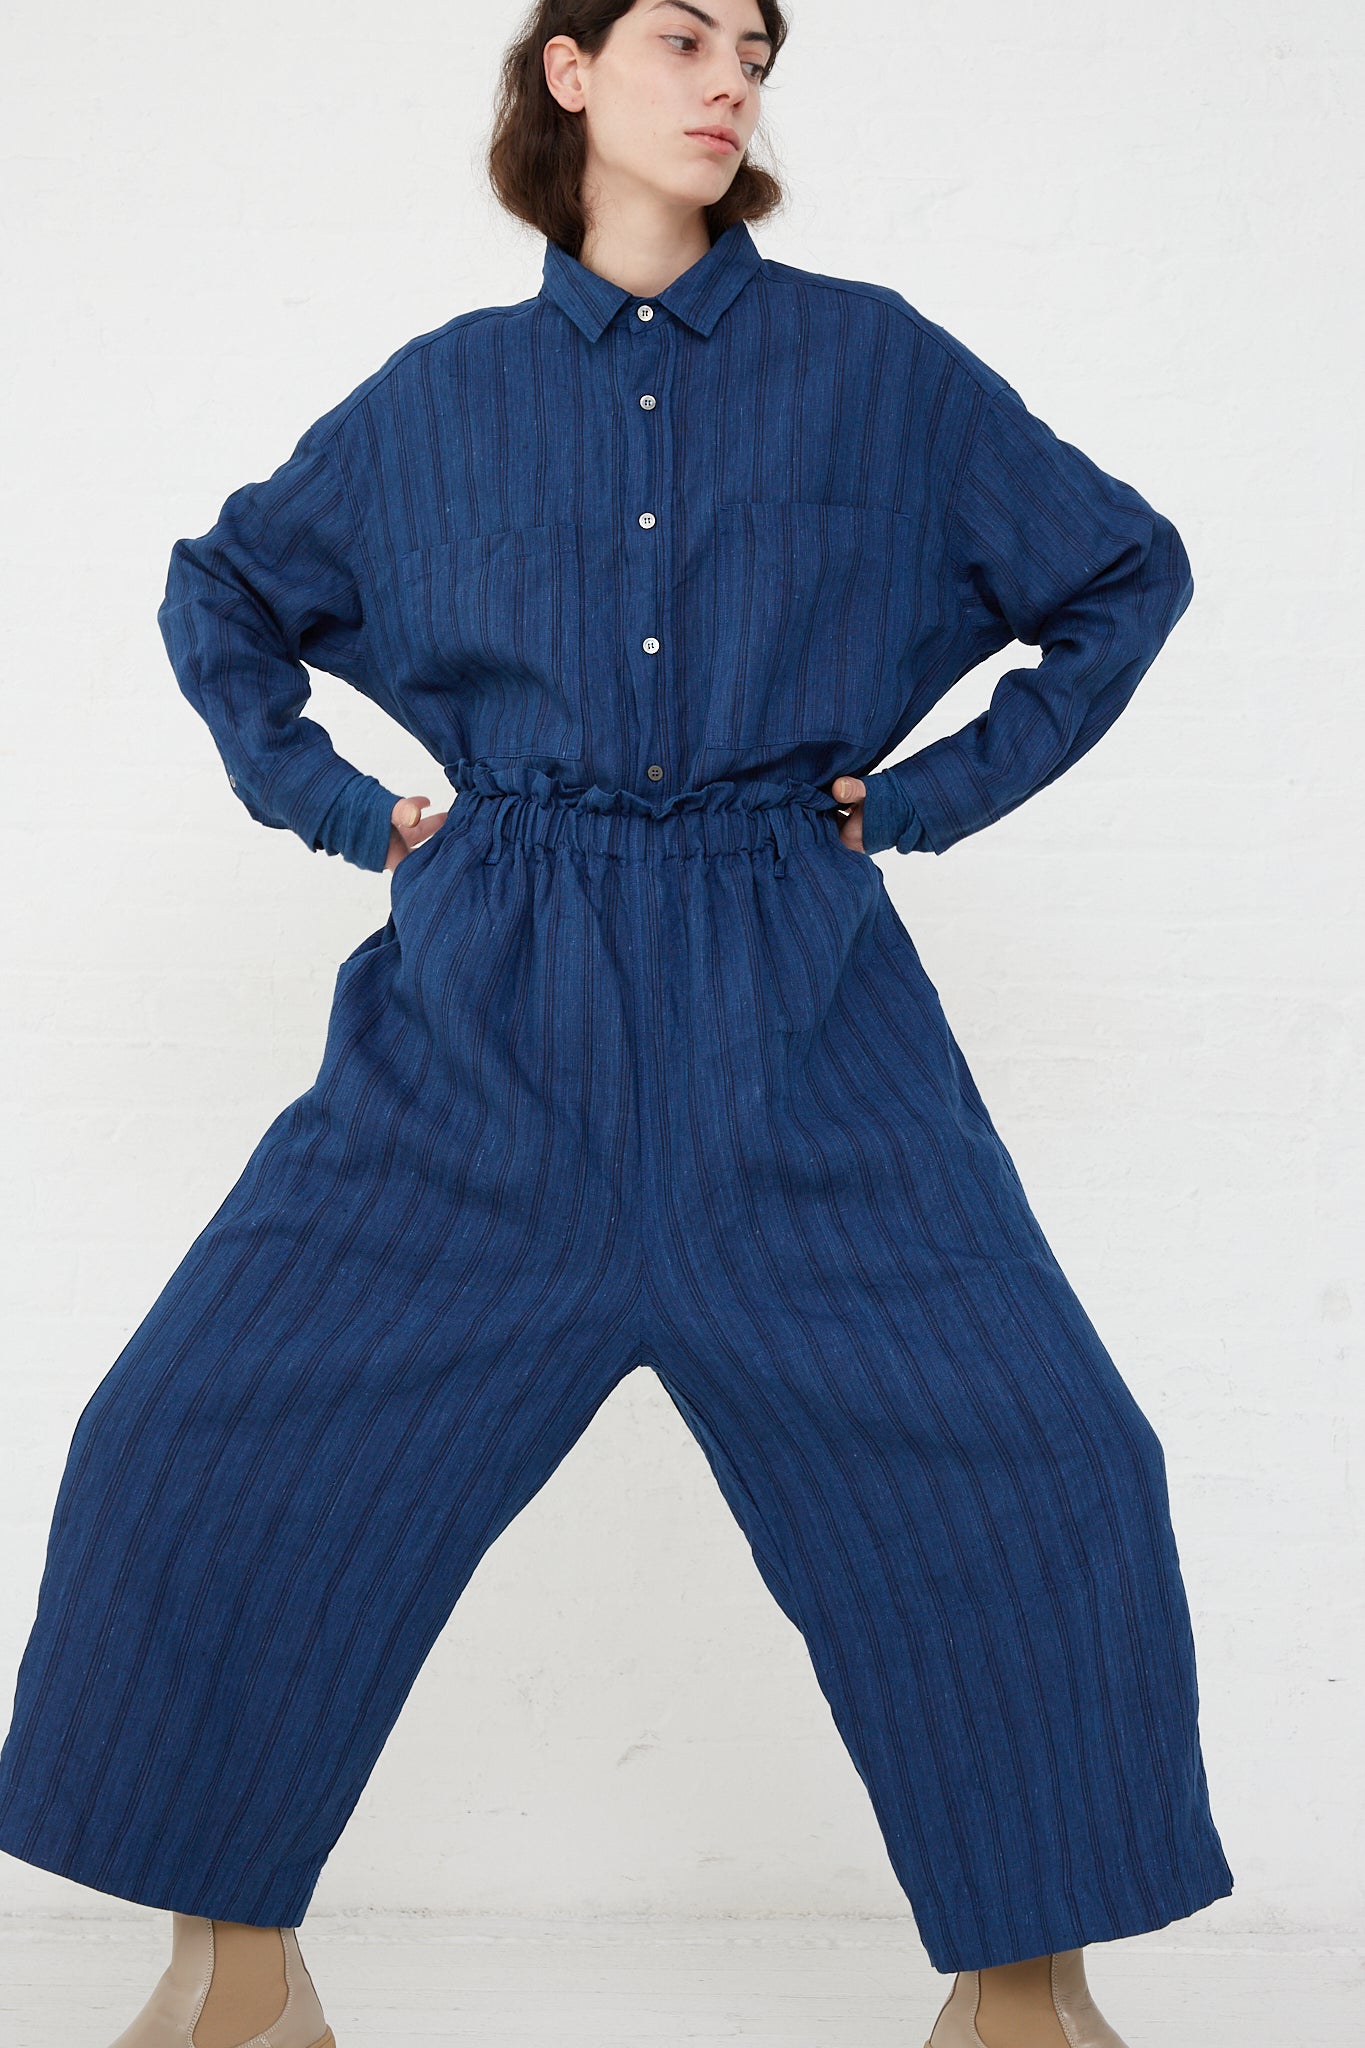 The model is wearing a Woven Linen Pant in Indigo Stripes by Ichi Antiquités with an elasticated waist and wide leg pants.